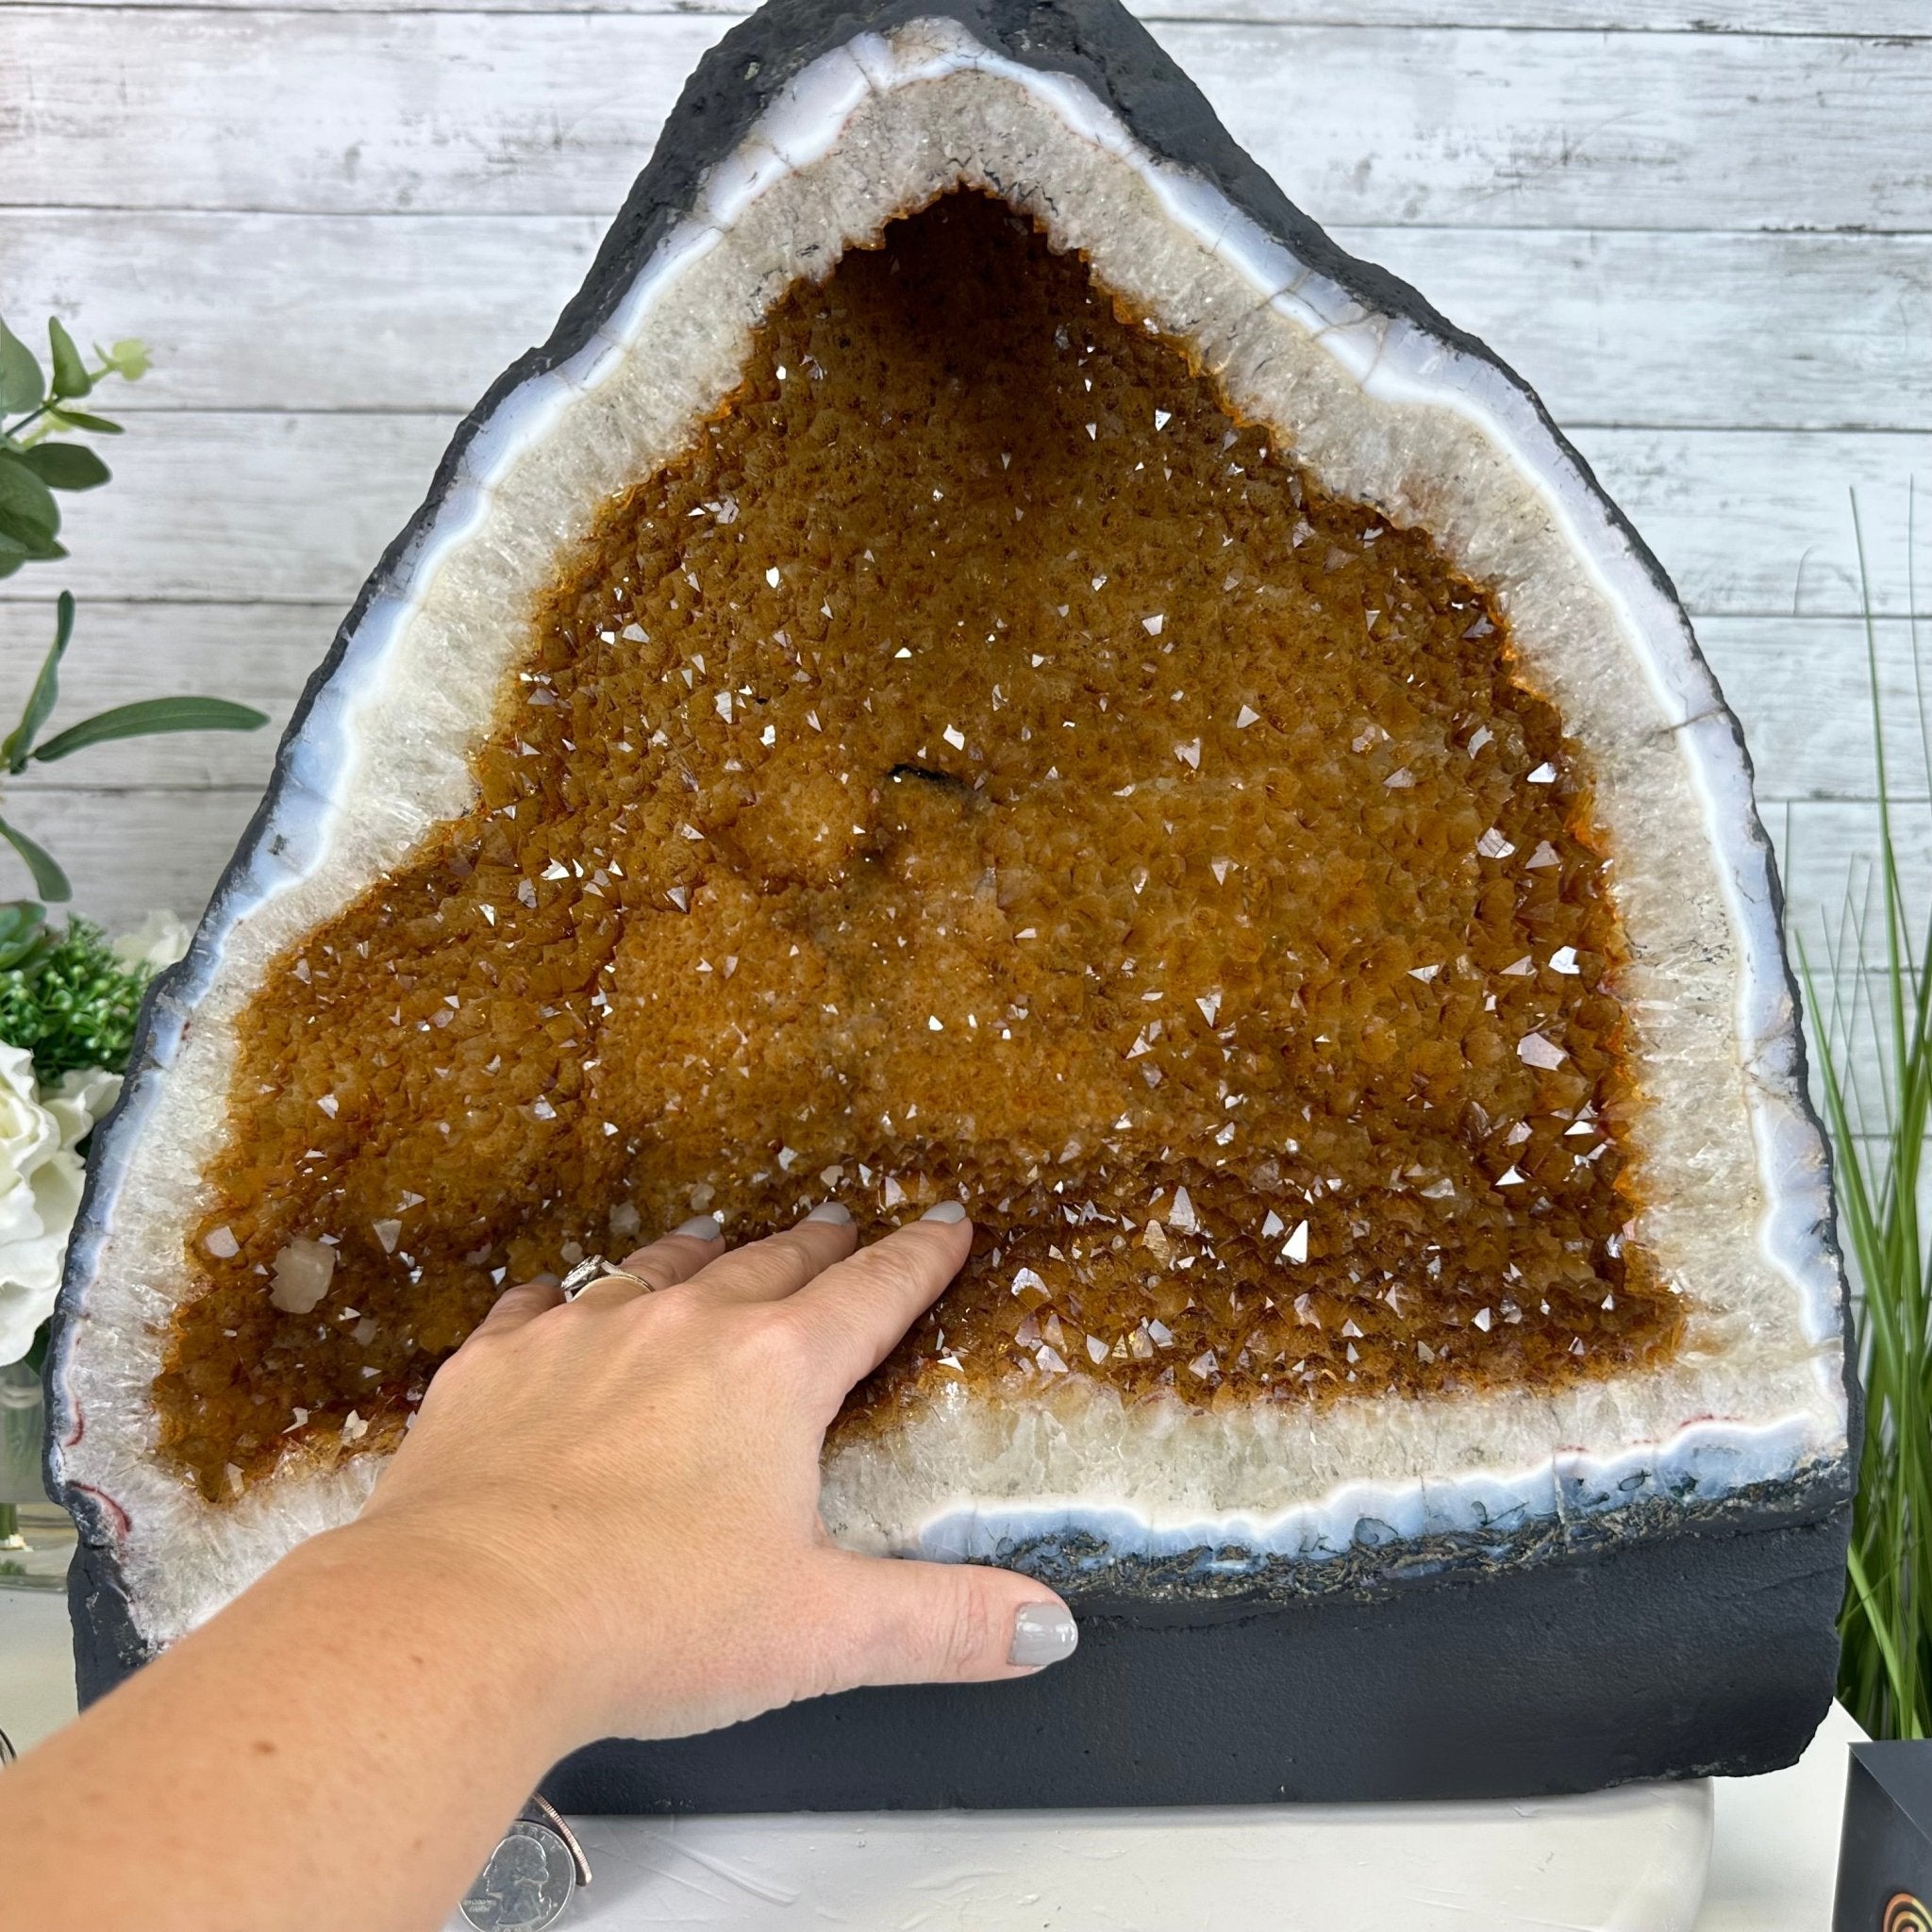 Extra Quality Citrine Cathedral, 79.2 lbs & 15.8" Tall #5603-0303 by Brazil Gems® - Brazil GemsBrazil GemsExtra Quality Citrine Cathedral, 79.2 lbs & 15.8" Tall #5603-0303 by Brazil Gems®Cathedrals5603-0303